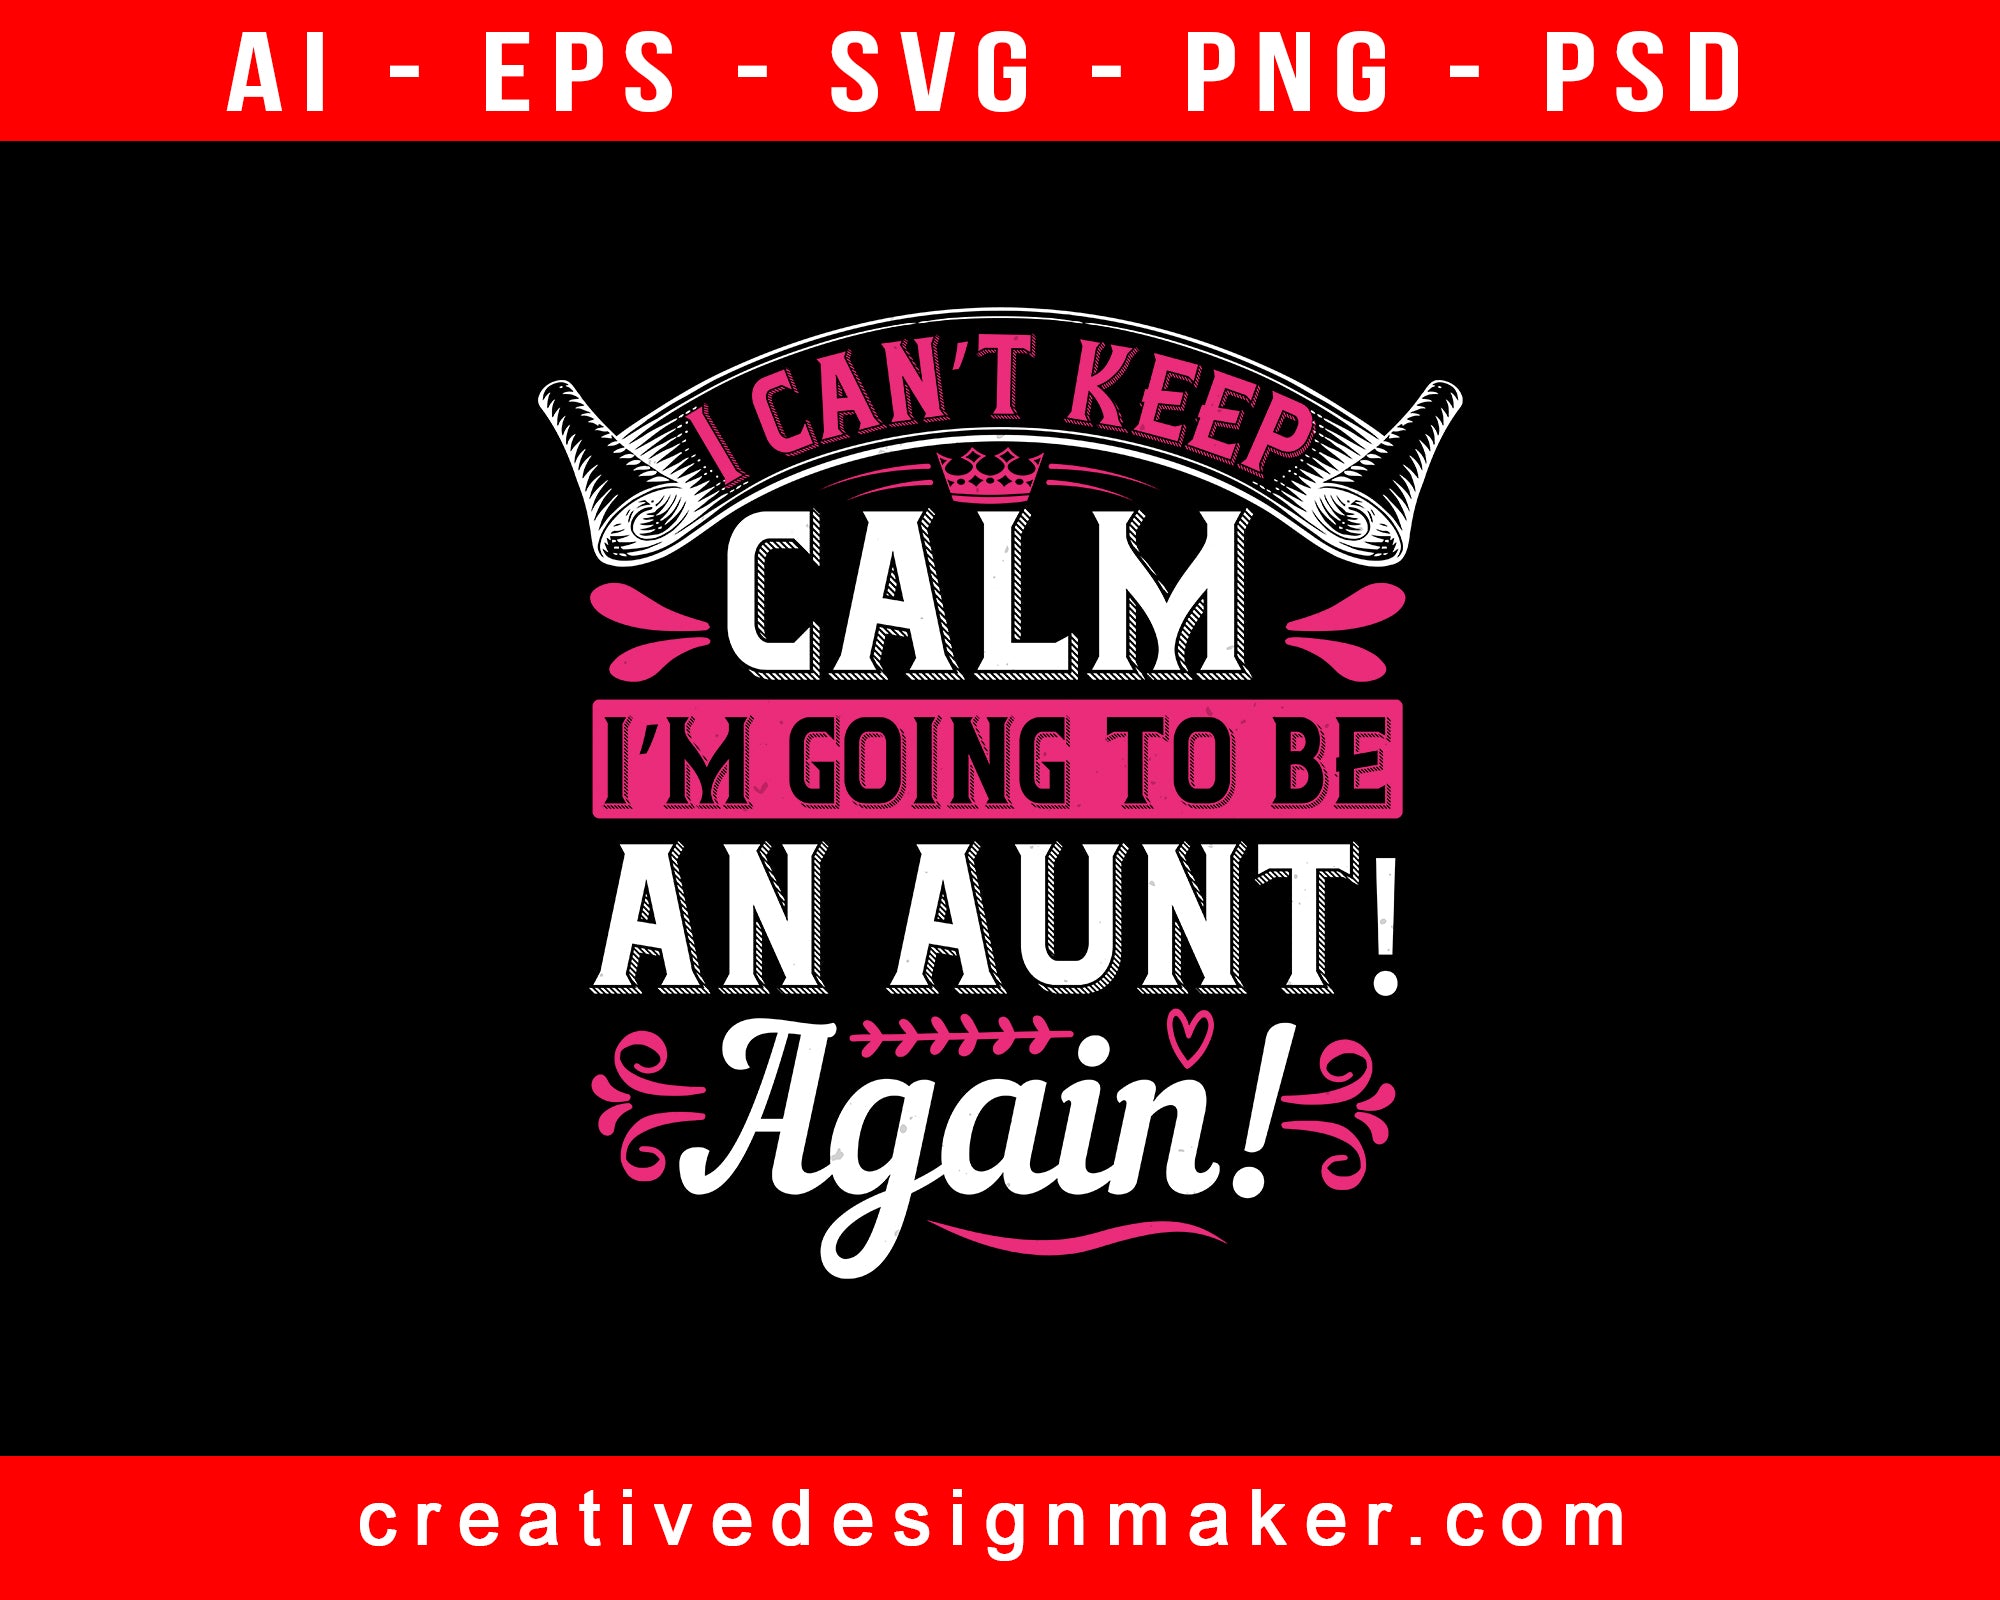 I Can’t Keep Calm I’m Going To Be An Aunt! Again! Print Ready Editable T-Shirt SVG Design!